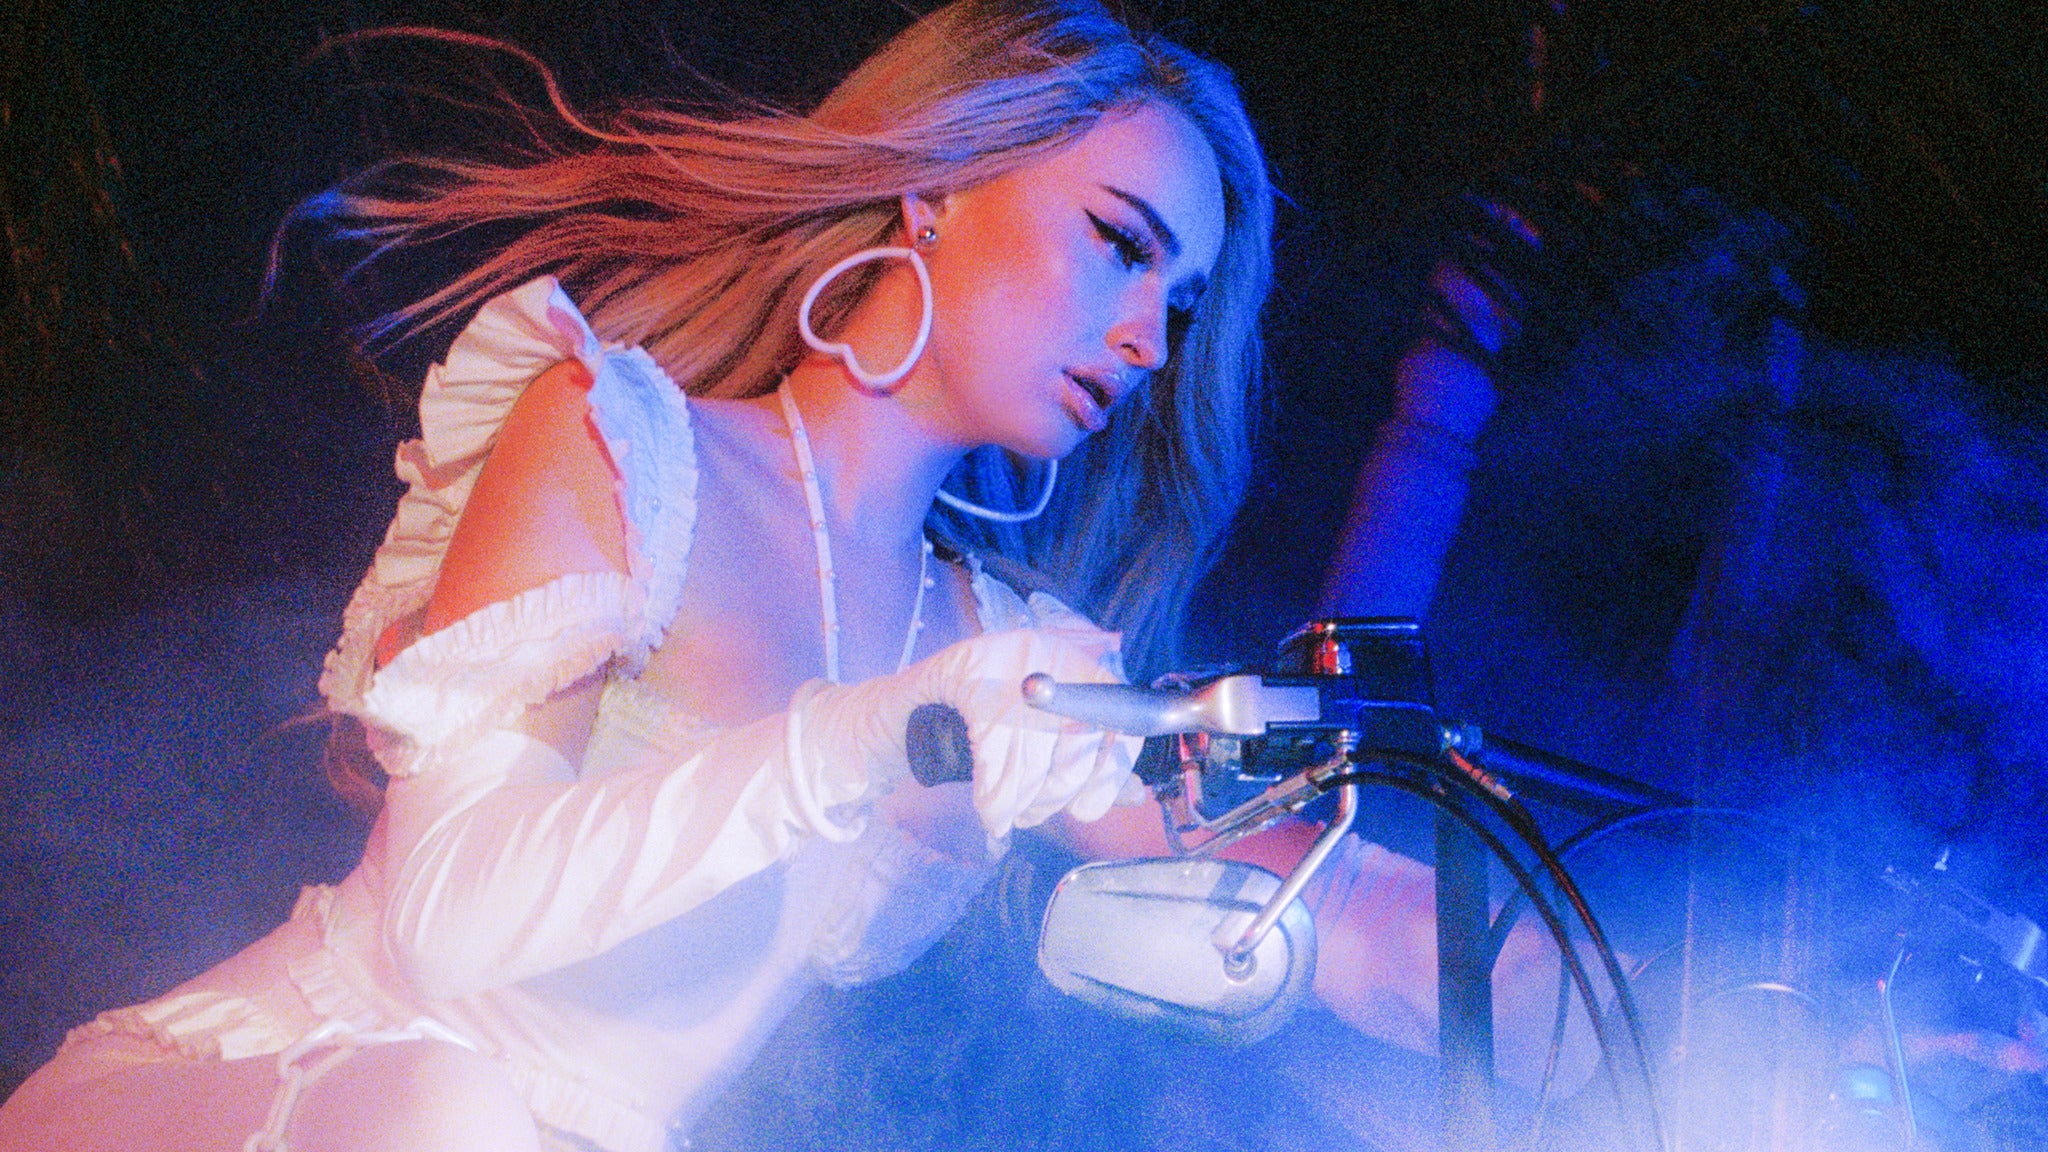 Kim Petras Presented By Sports Illustrated Swimsuit presale code for real tickets in Hollywood